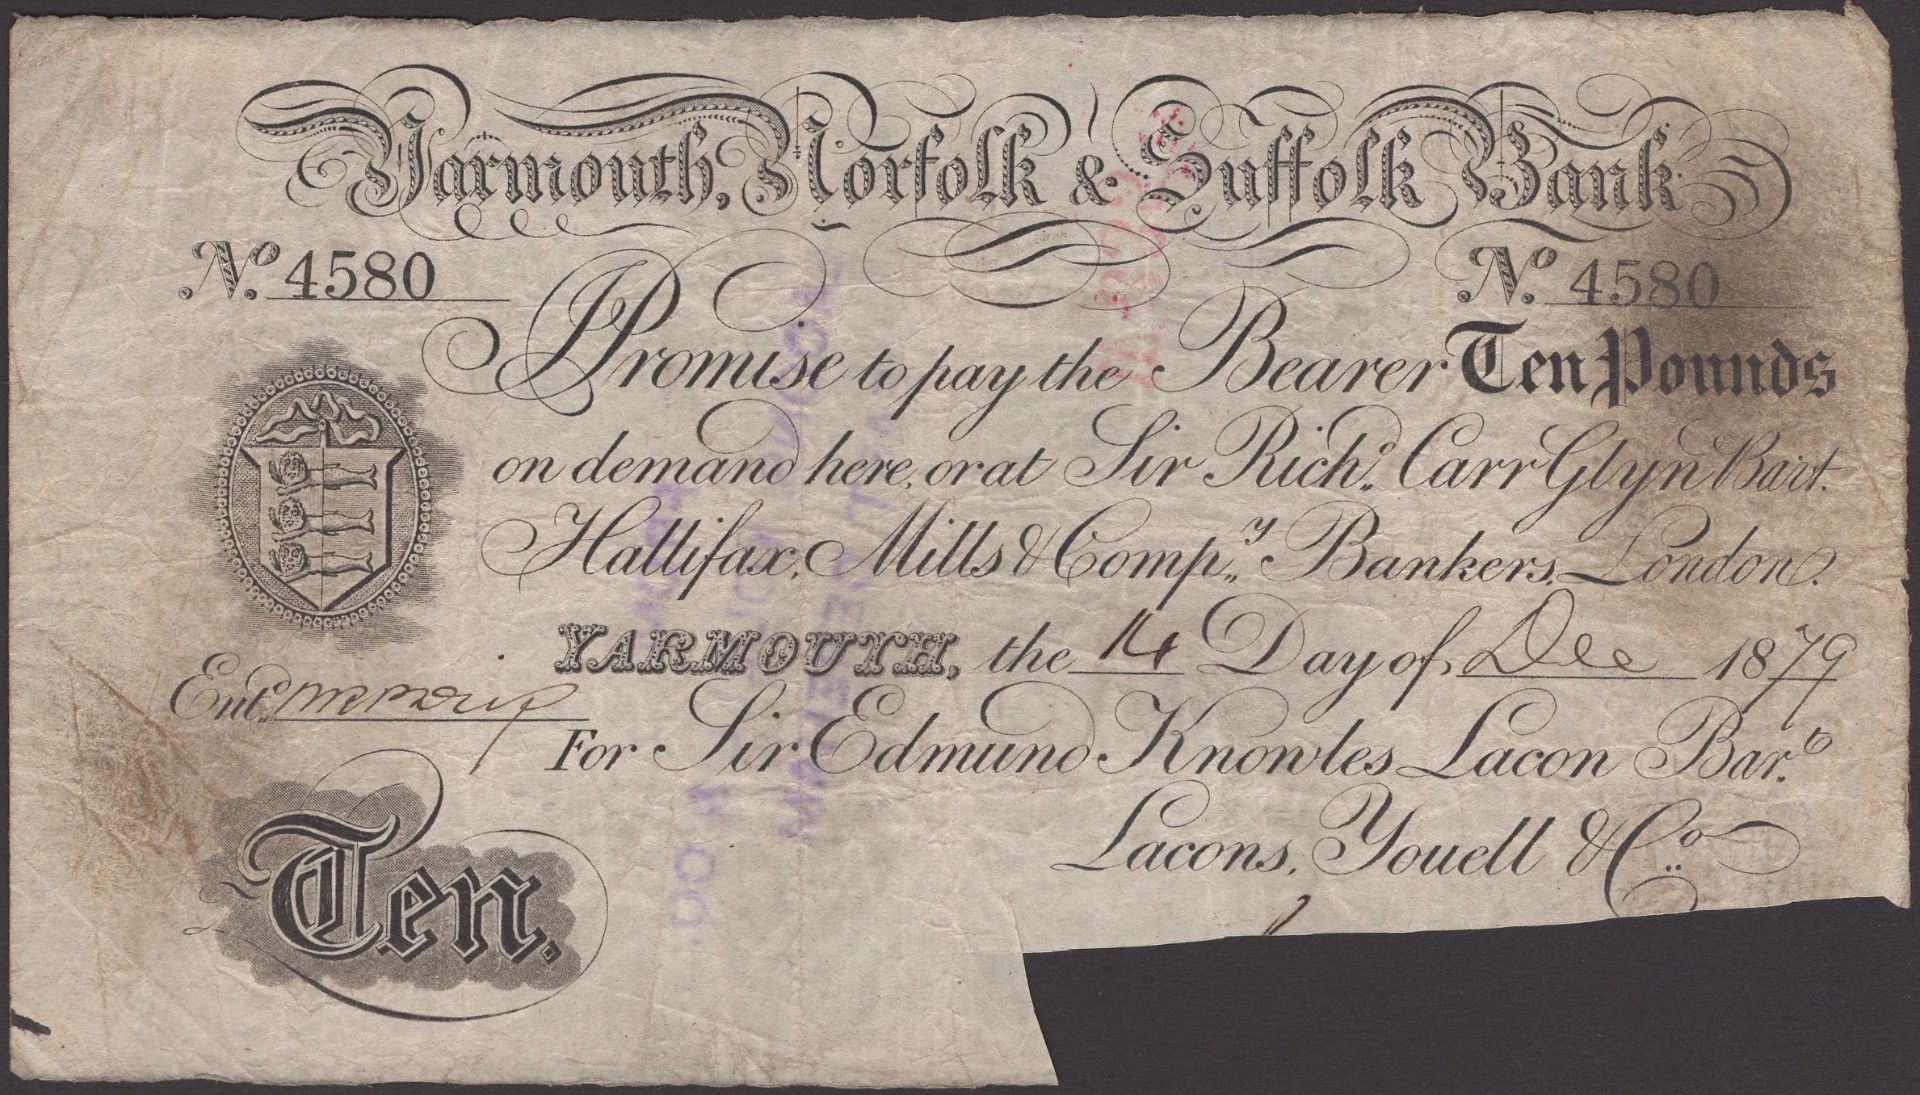 Yarmouth, Norfolk & Suffolk Bank, for Sir Edmund Knowles Lacon Bart Lacons, Youell & Co., Â£1...